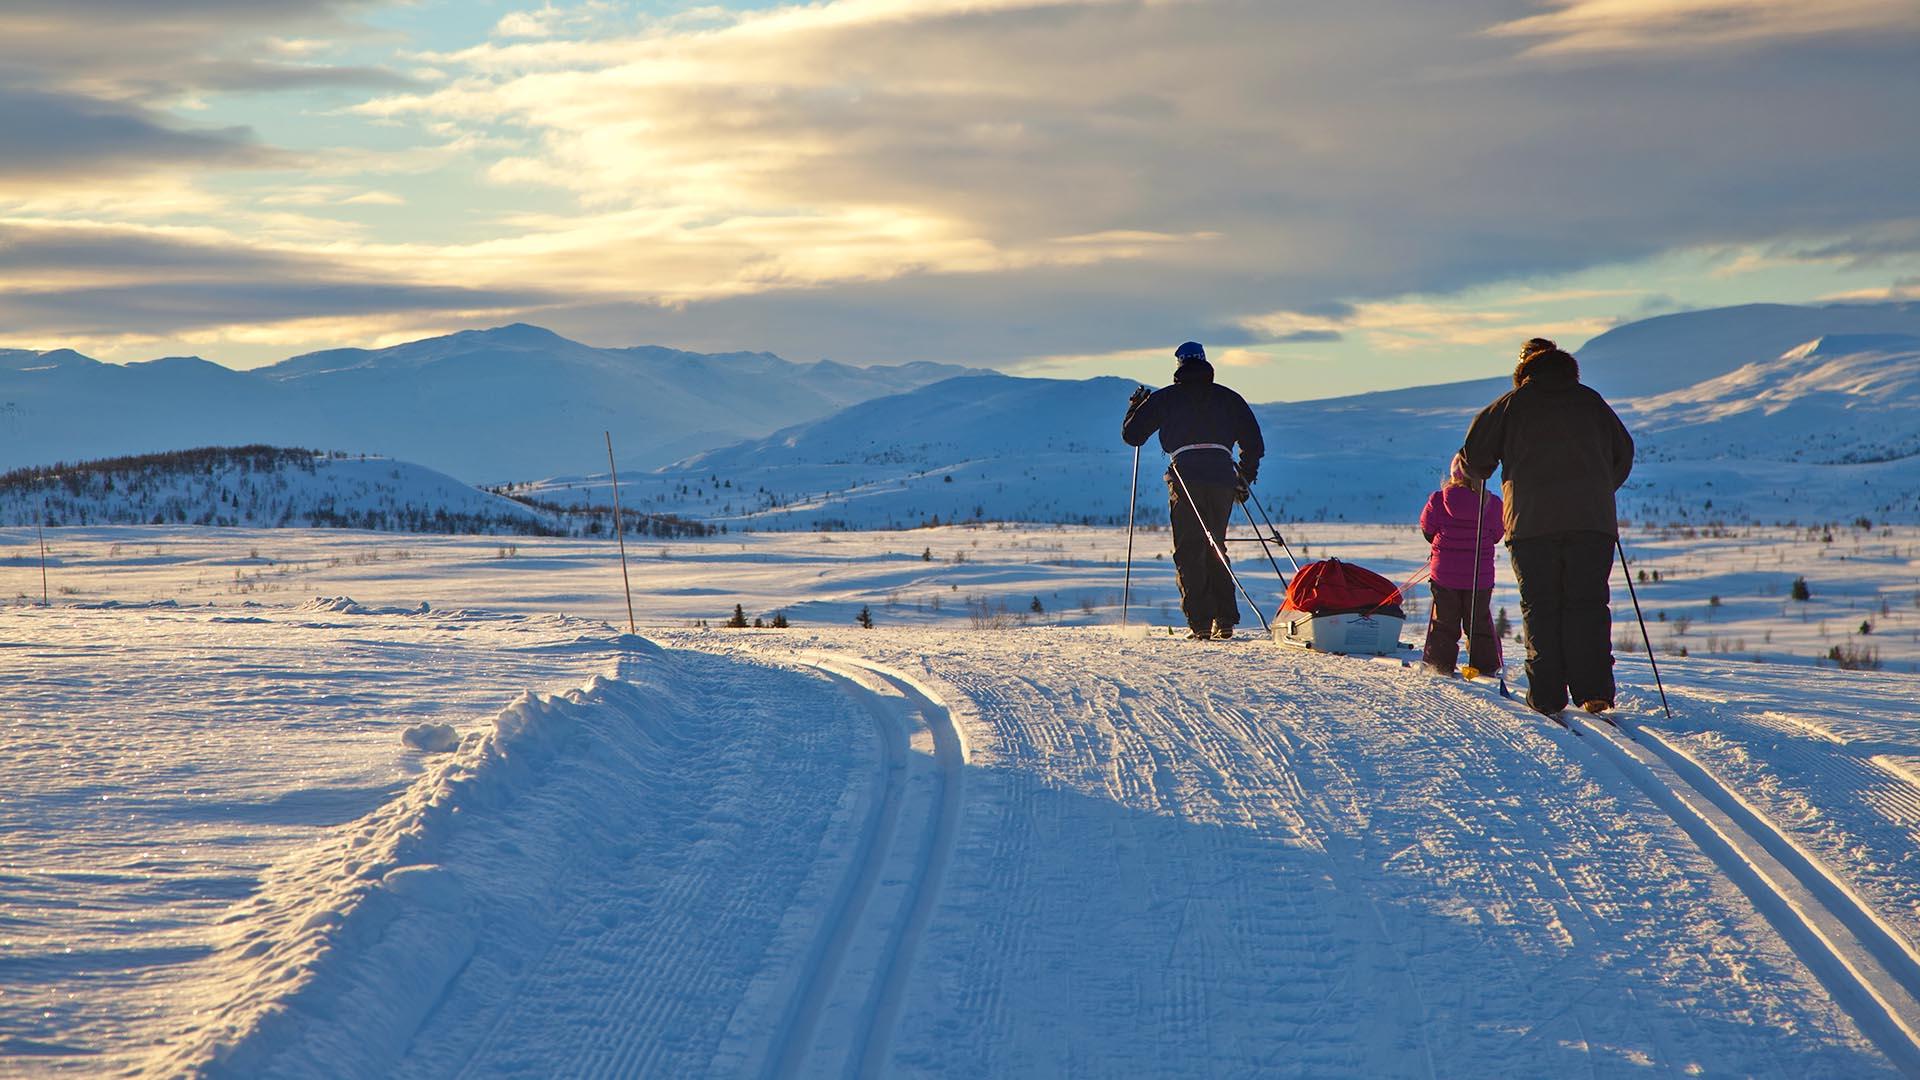 Family on cross country skis. Mountains in the background.